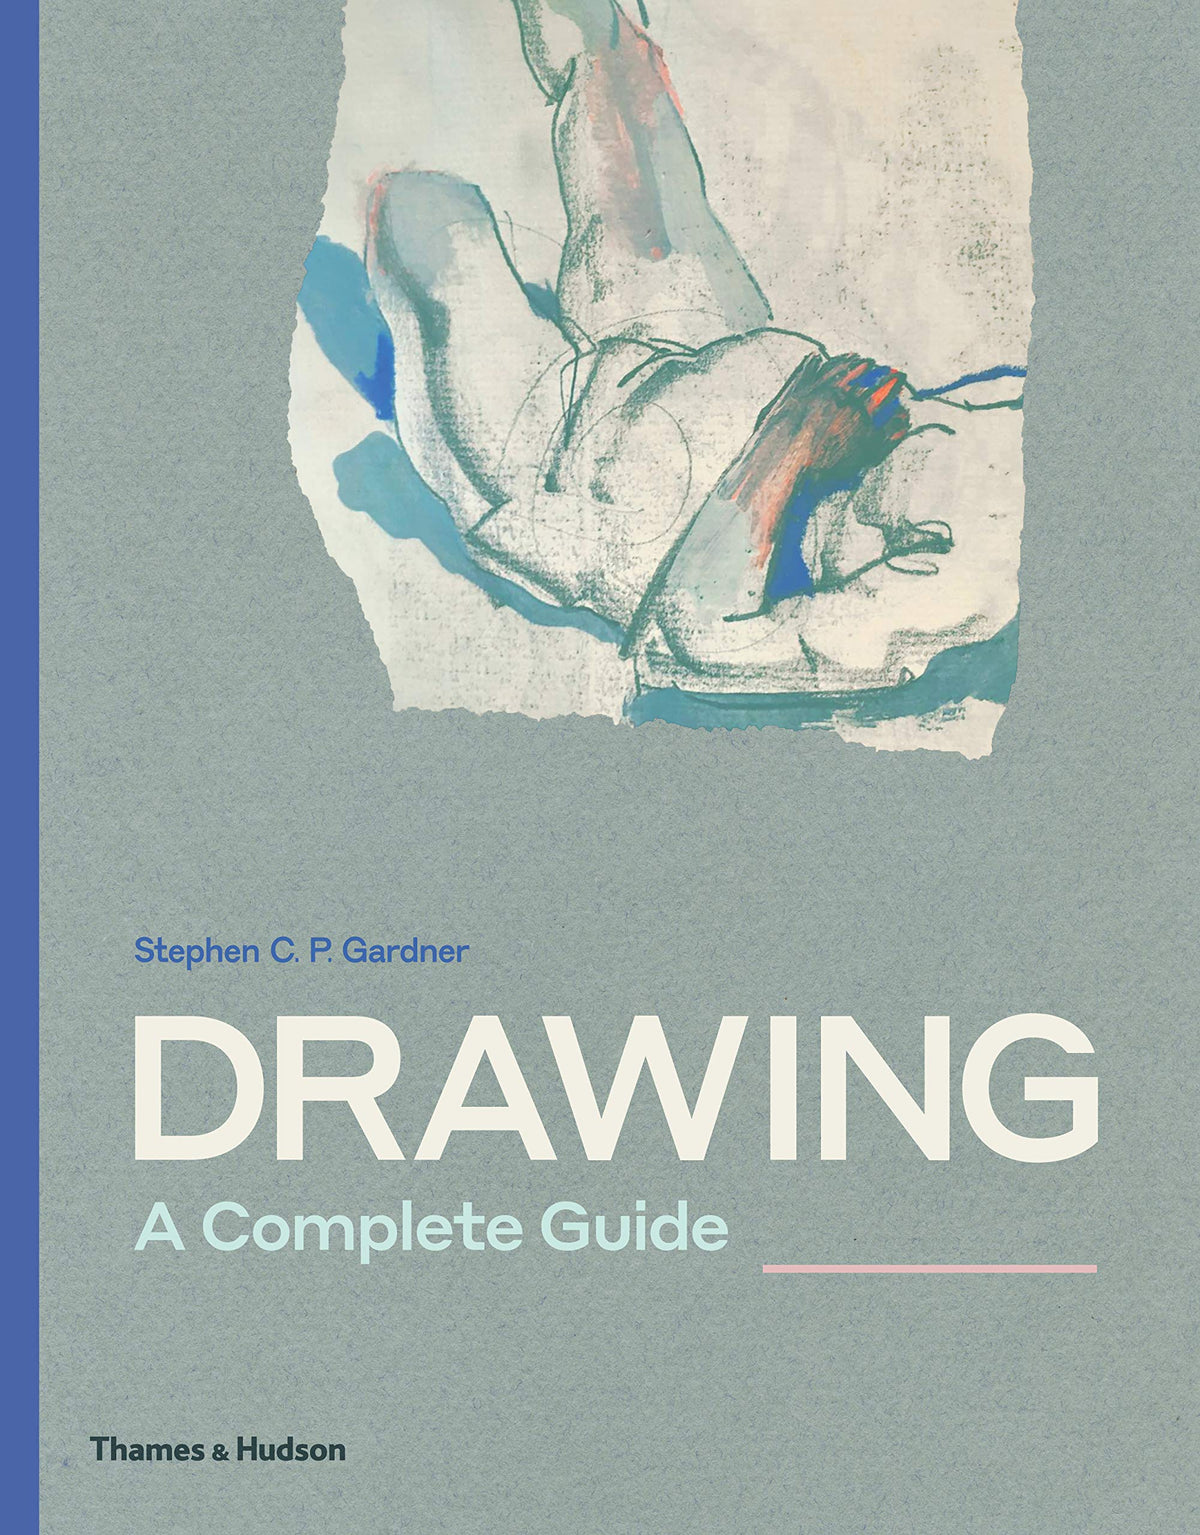 Drawing, A Complete Guide by Stephen C. P. Gardner